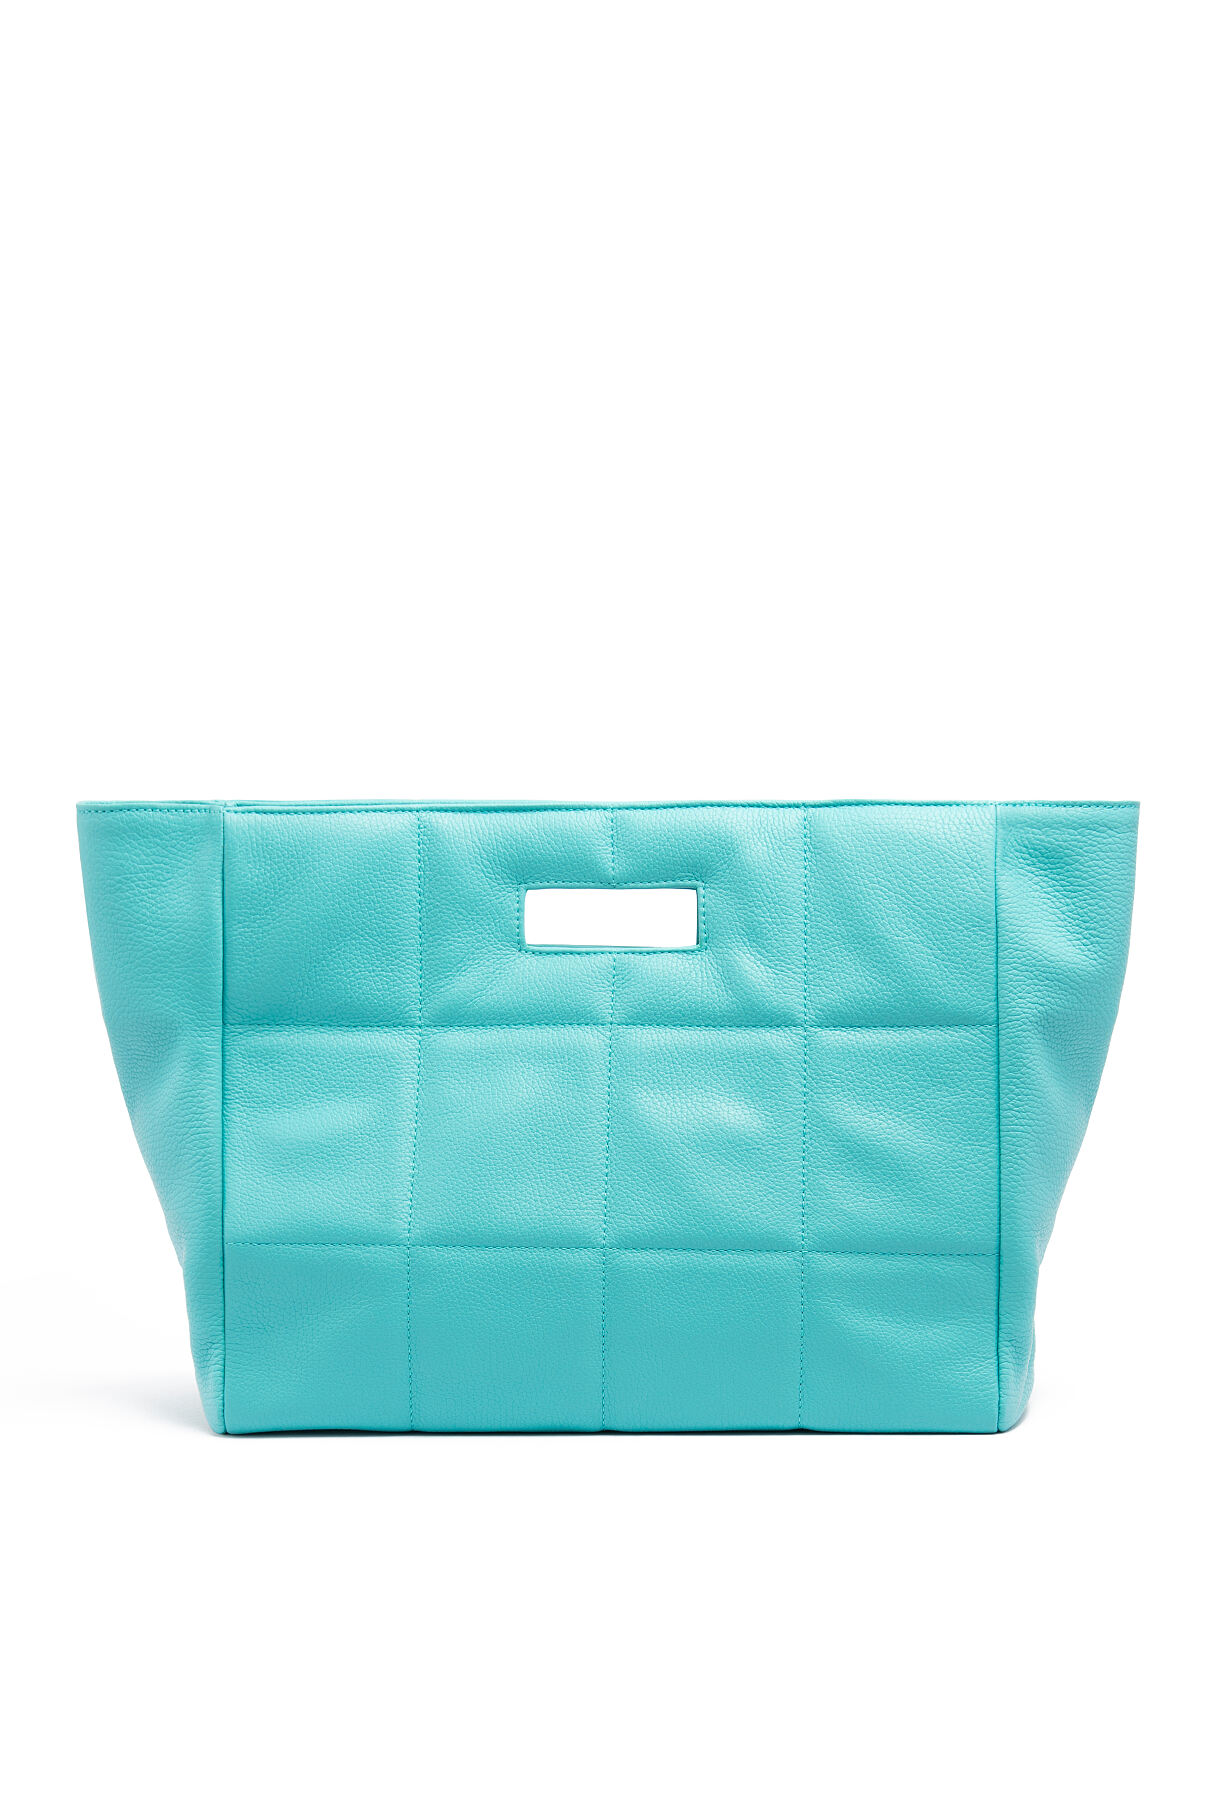 THE QUILTED BAG SOFT AQUA CONSTANTLY K X SKERGETH_€540